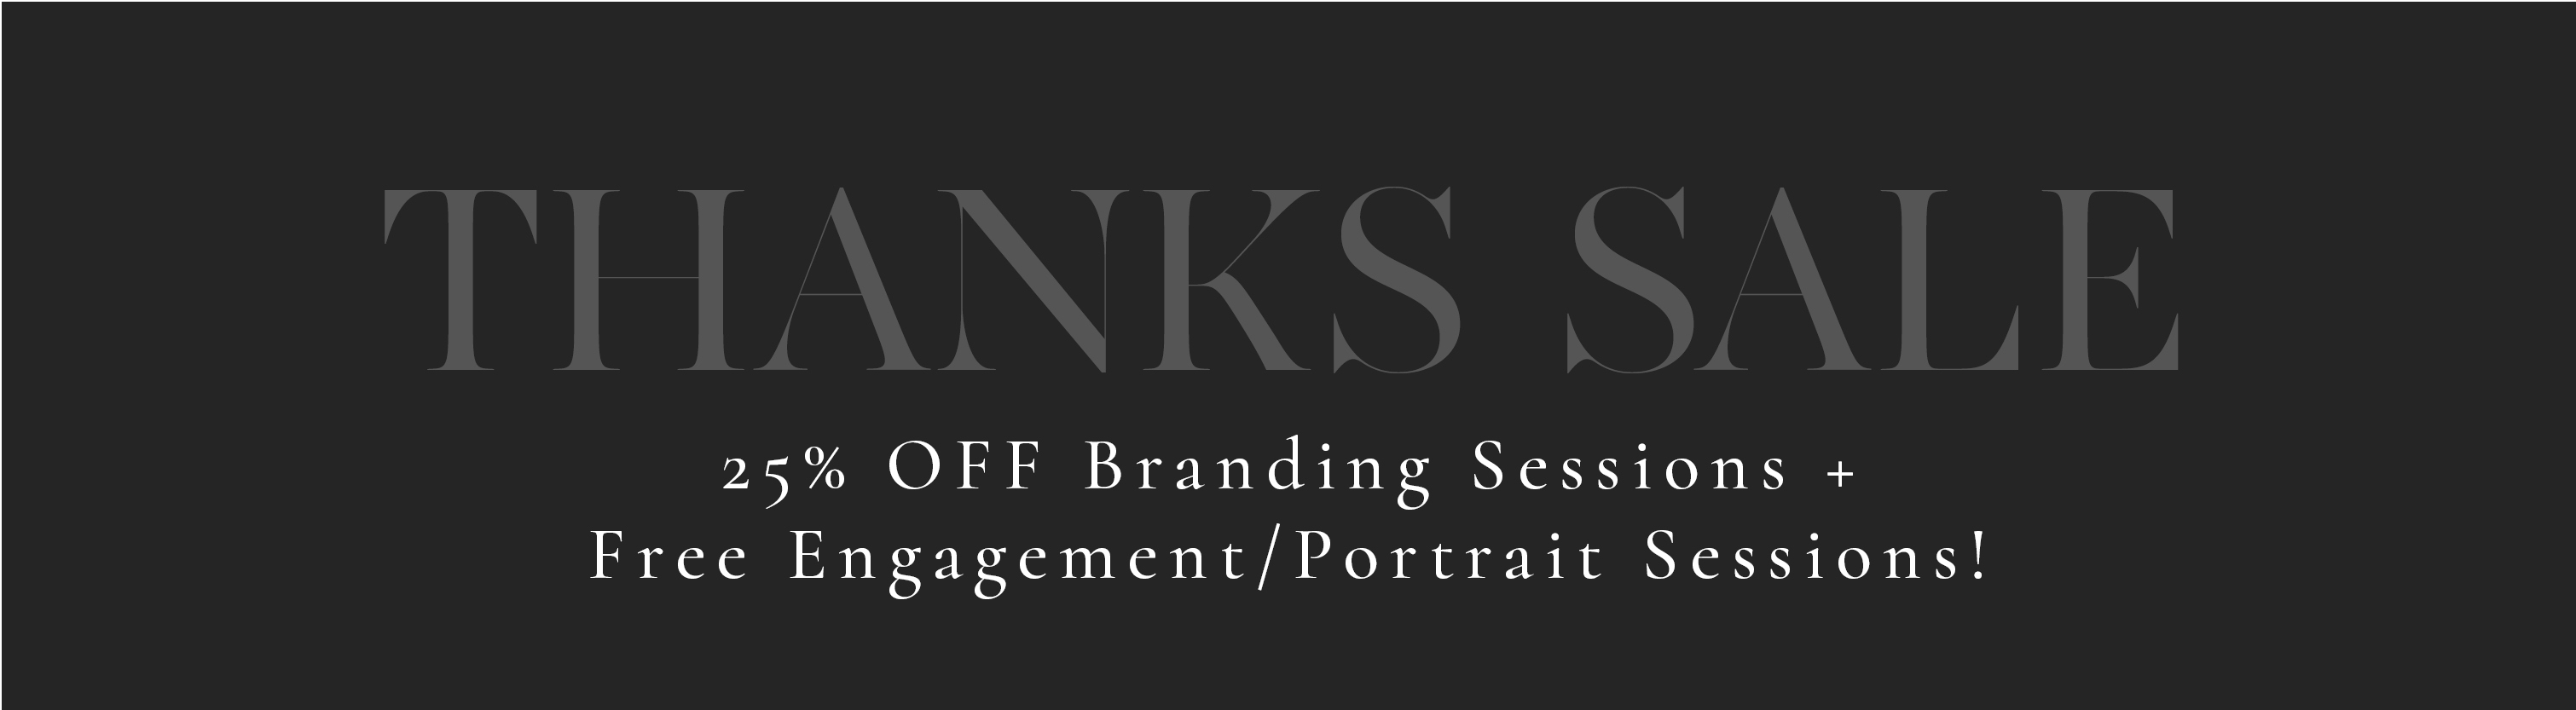 Black Friday Sale | Branding Sessions | Wedding Photography | www.msp-photography.com